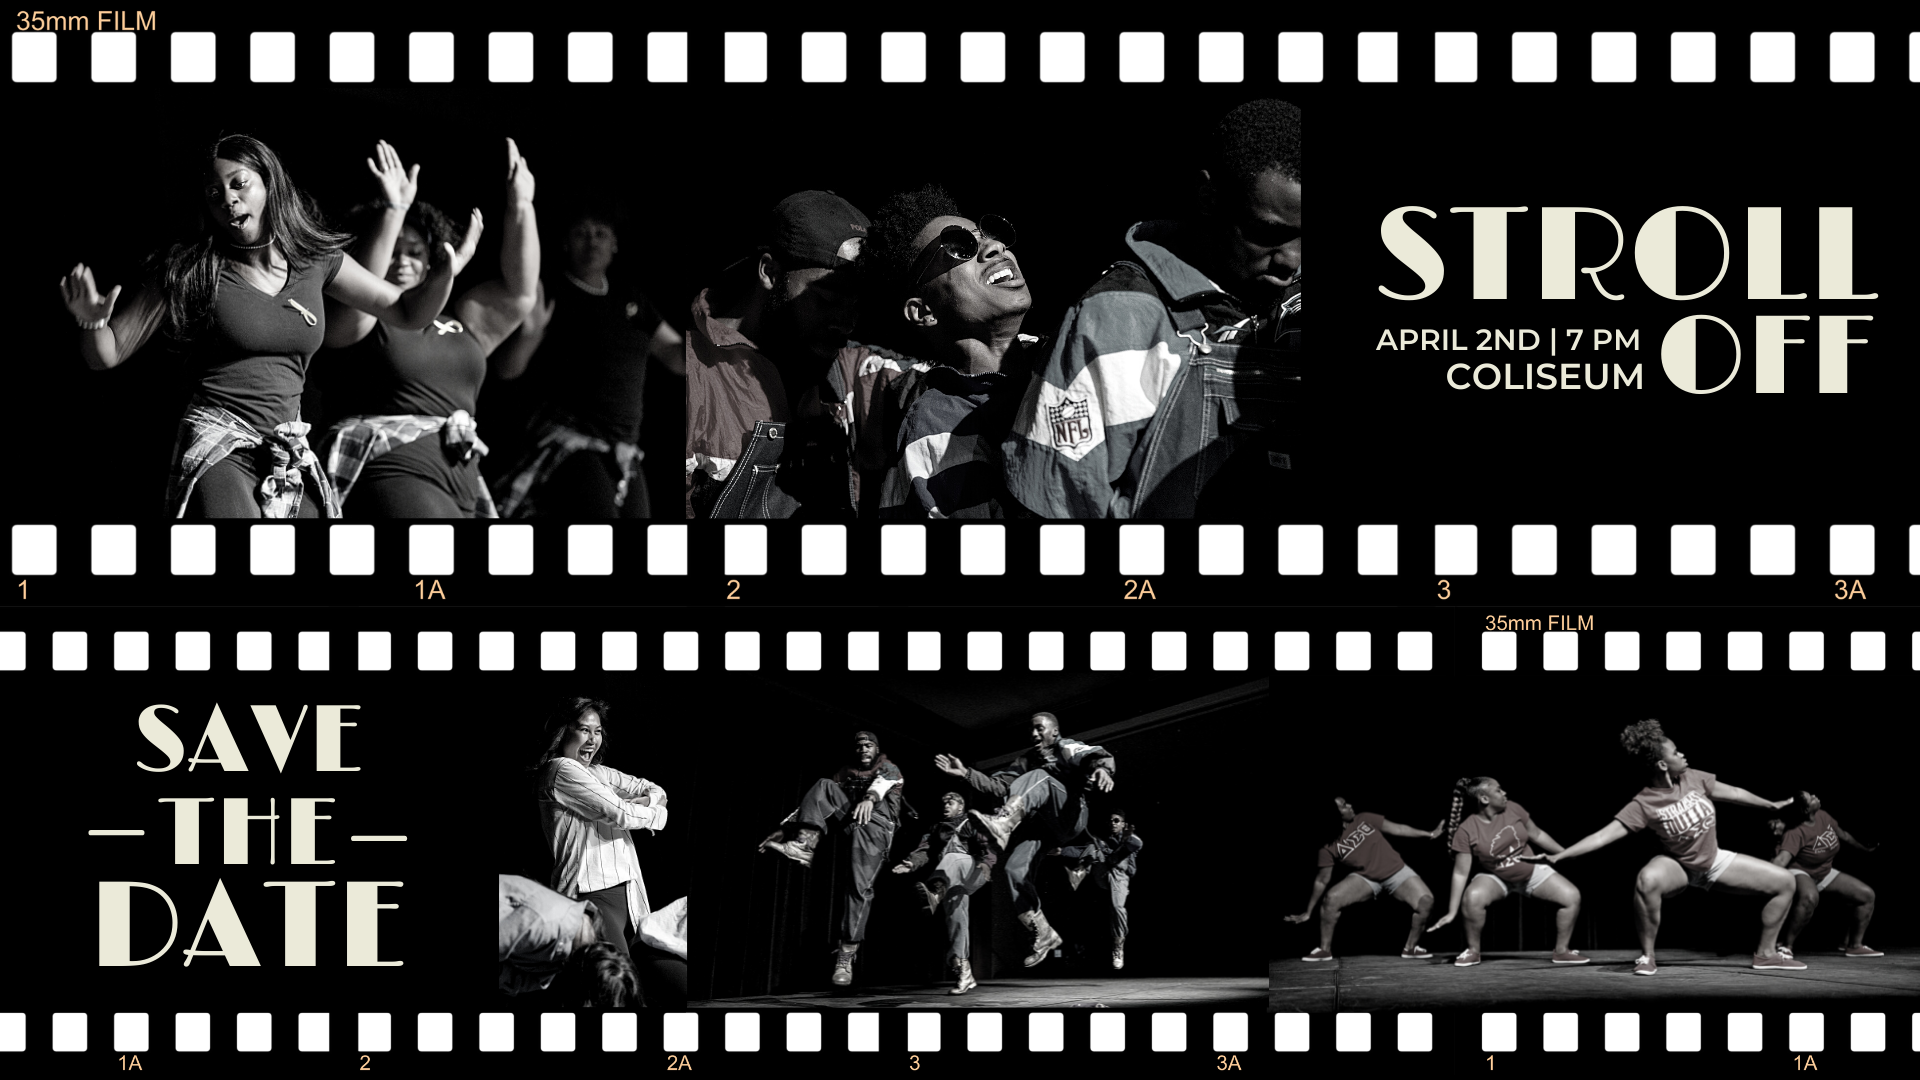 After a pandemic hiatus, the annual Stroll Off returns to campus April 2, 2022. 